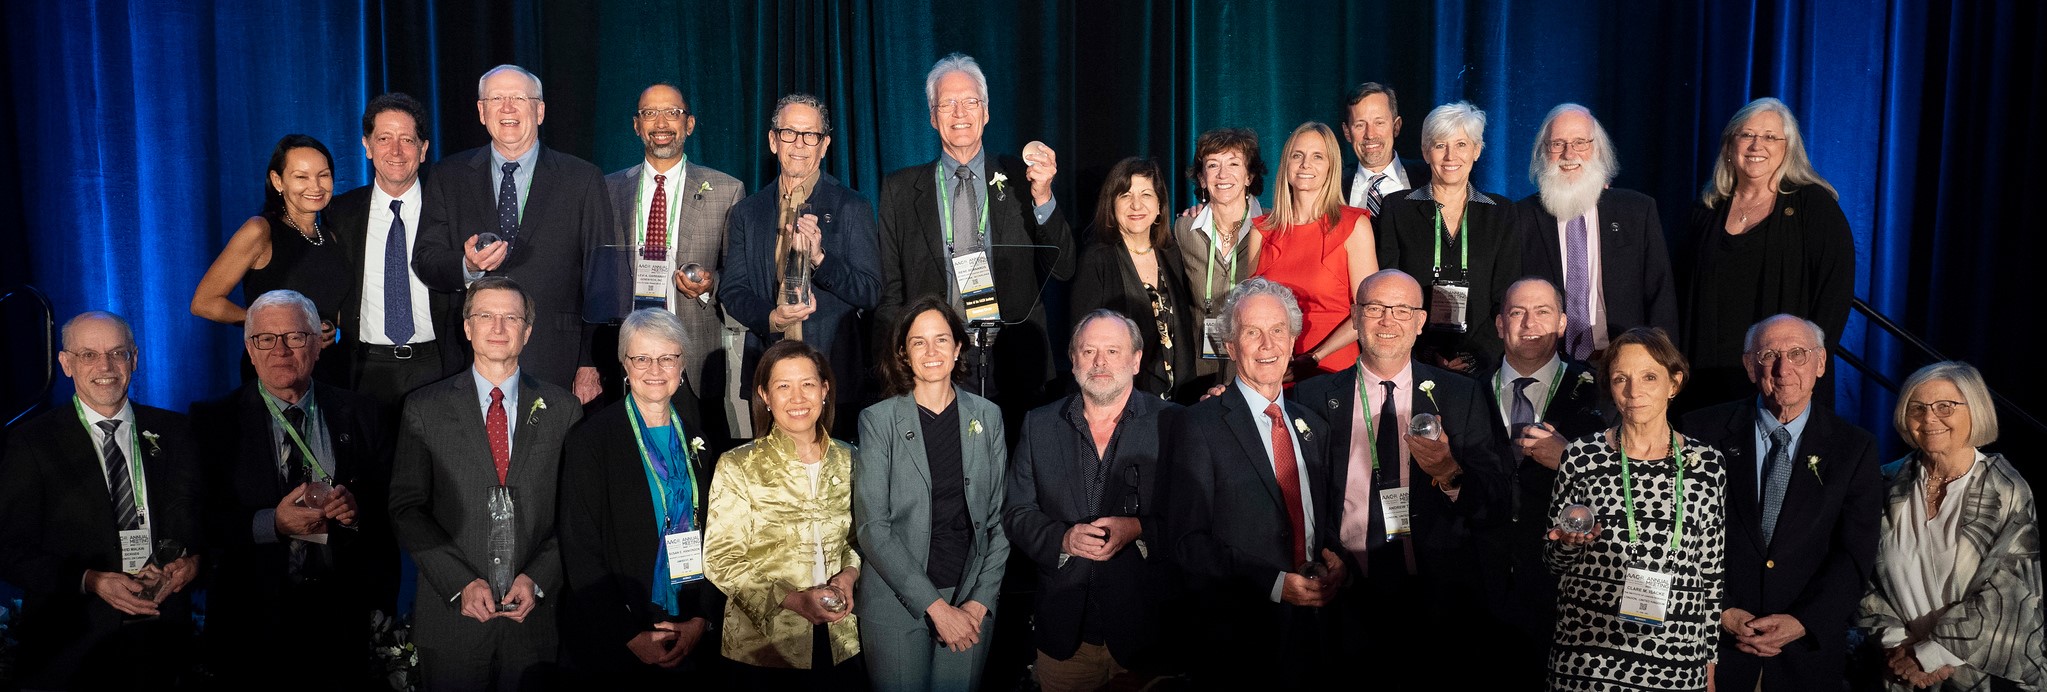 2022 AACR Scientific Achievement Award and Lectureship recipients.